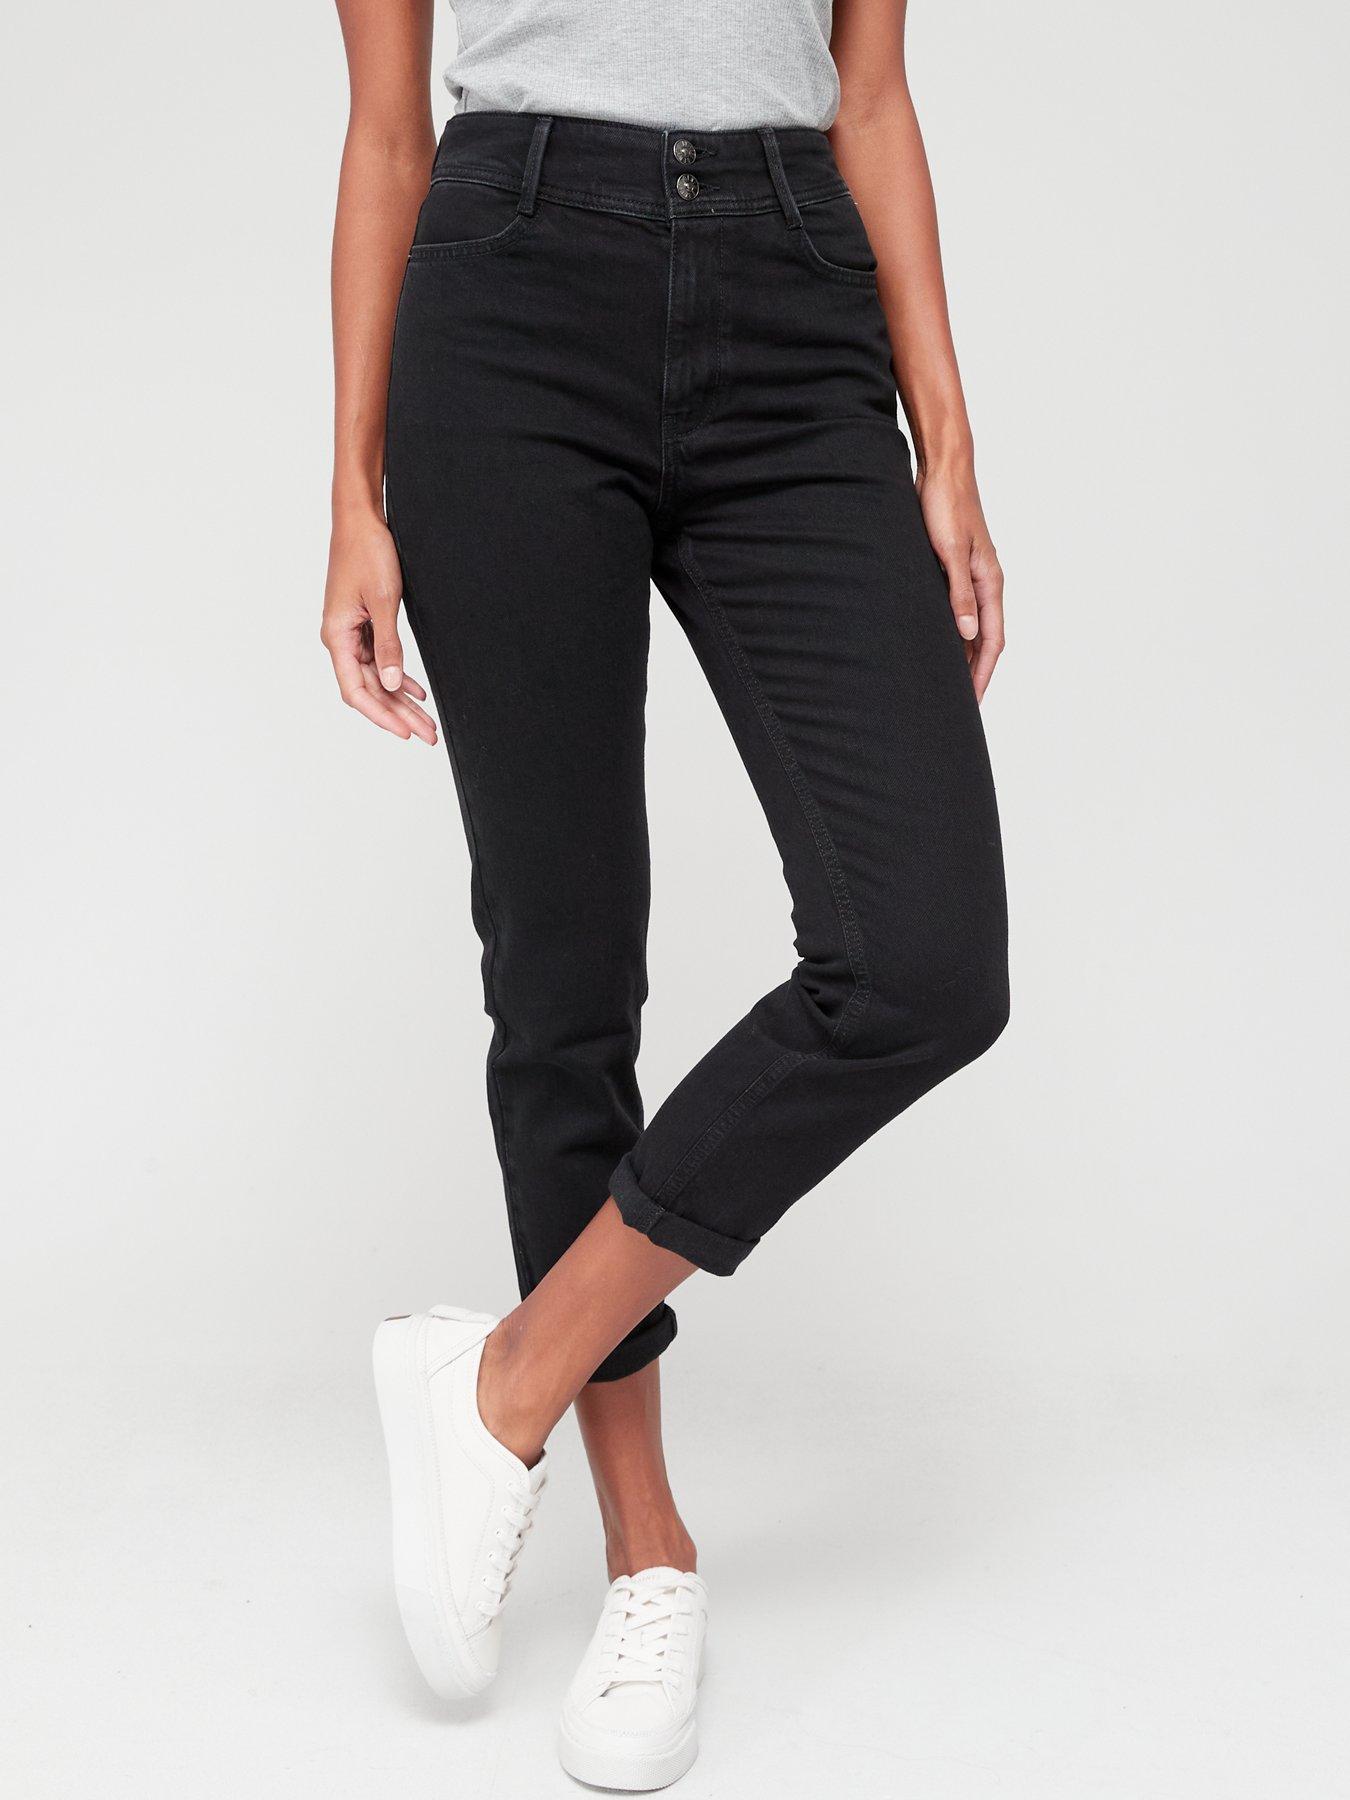 Black High Waisted Jeans for Women